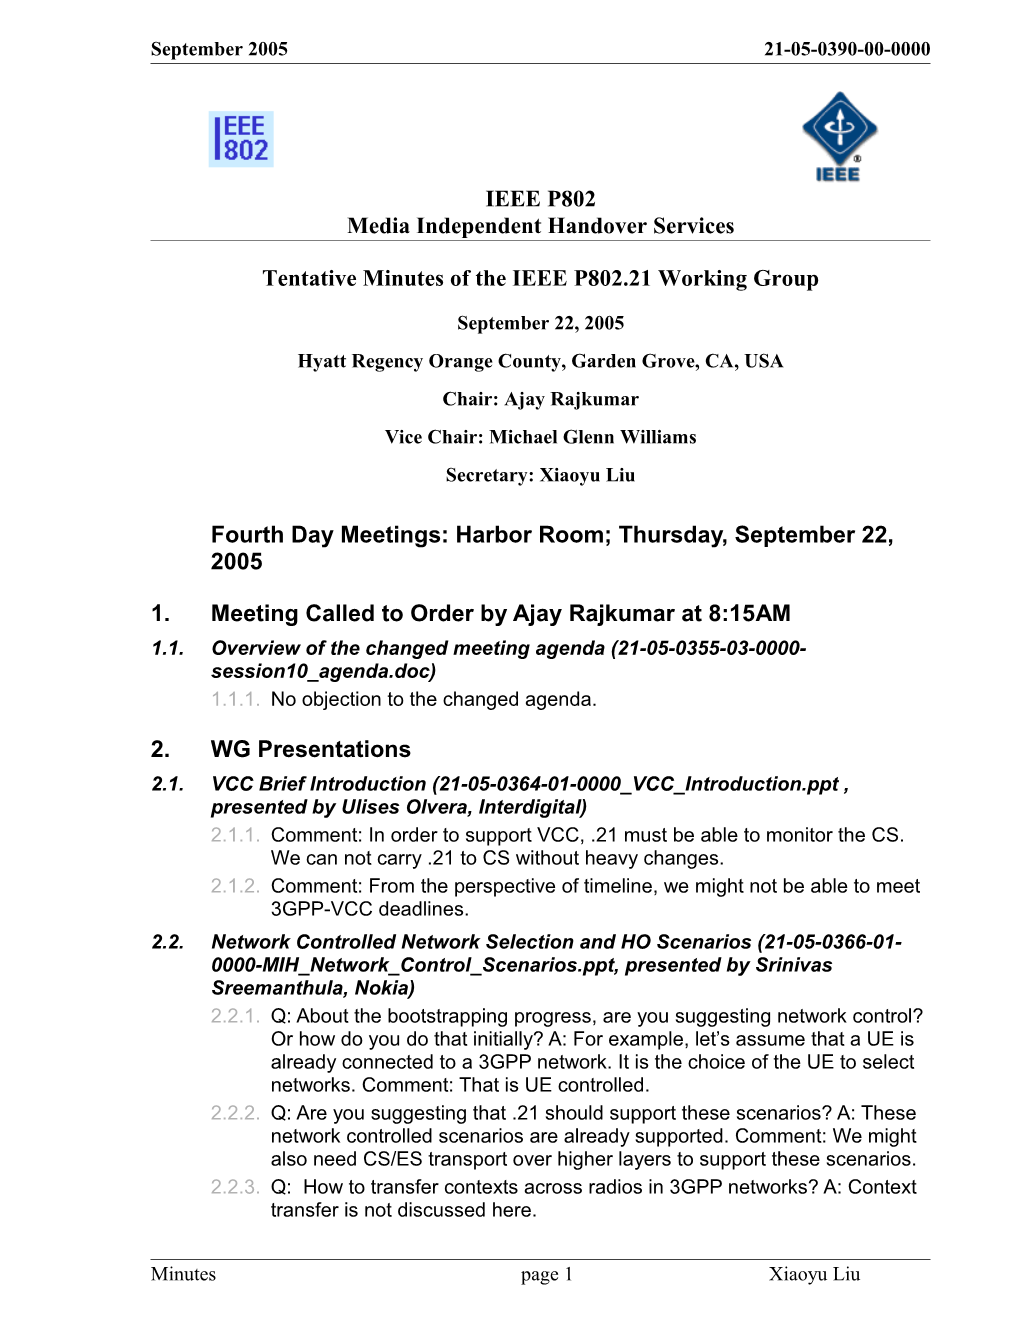 Tentative Minutes of the IEEE P802.21 Working Group s1